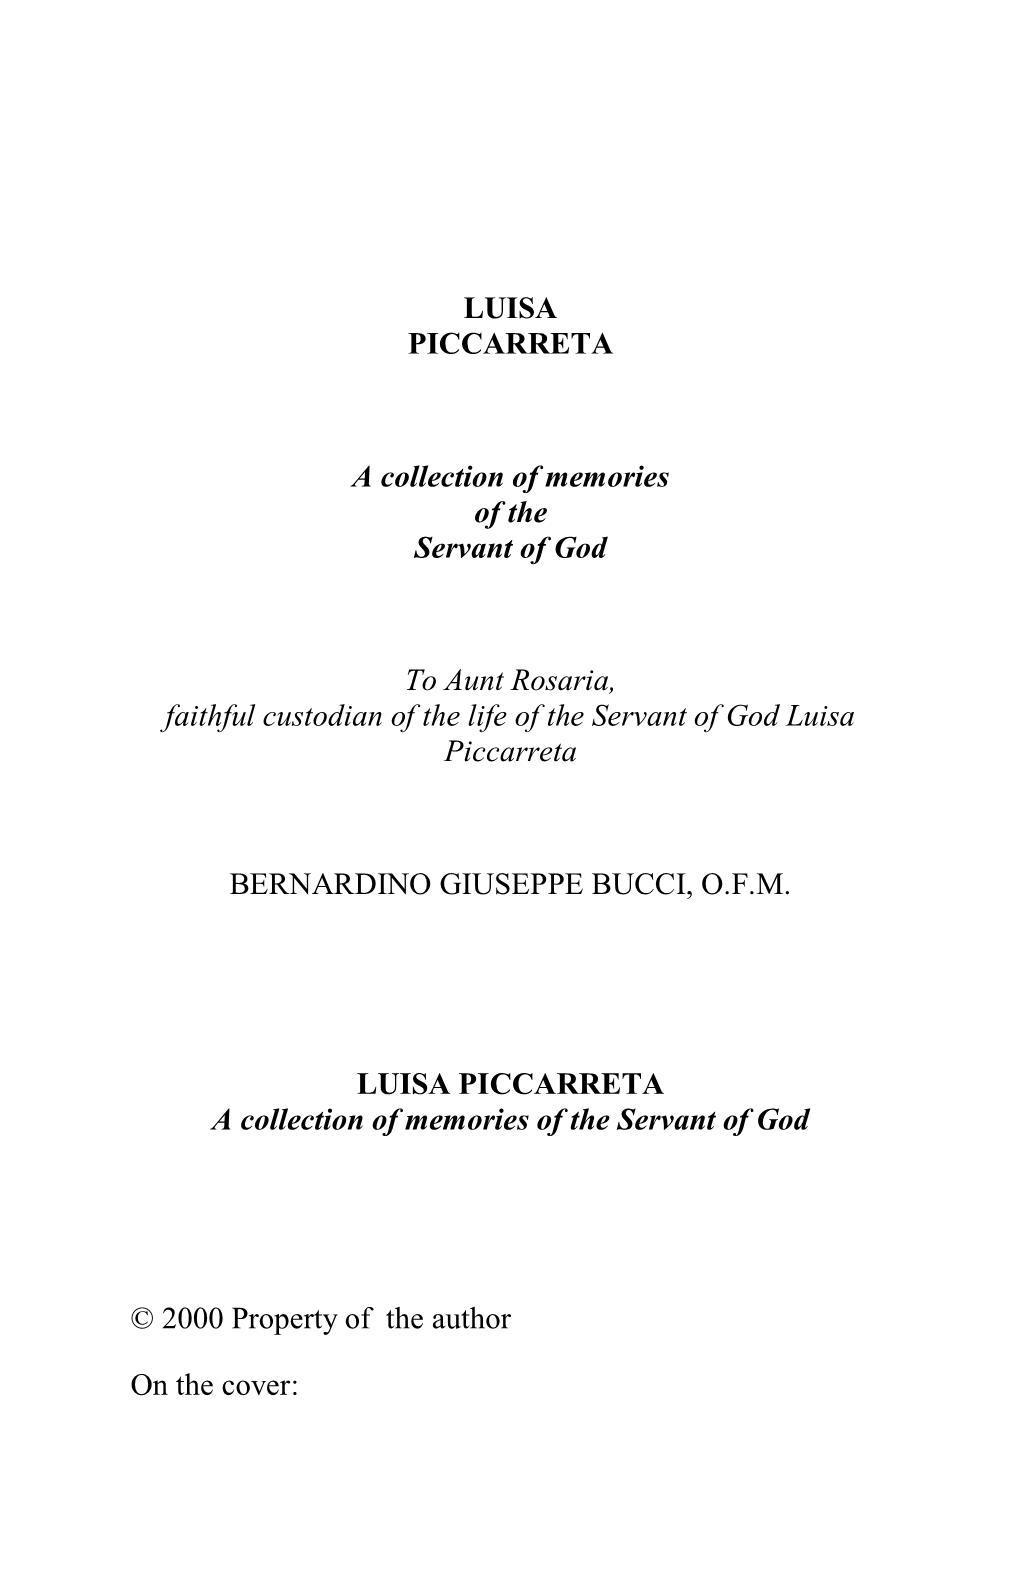 LUISA PICCARRETA a Collection of Memories of the Servant of God To